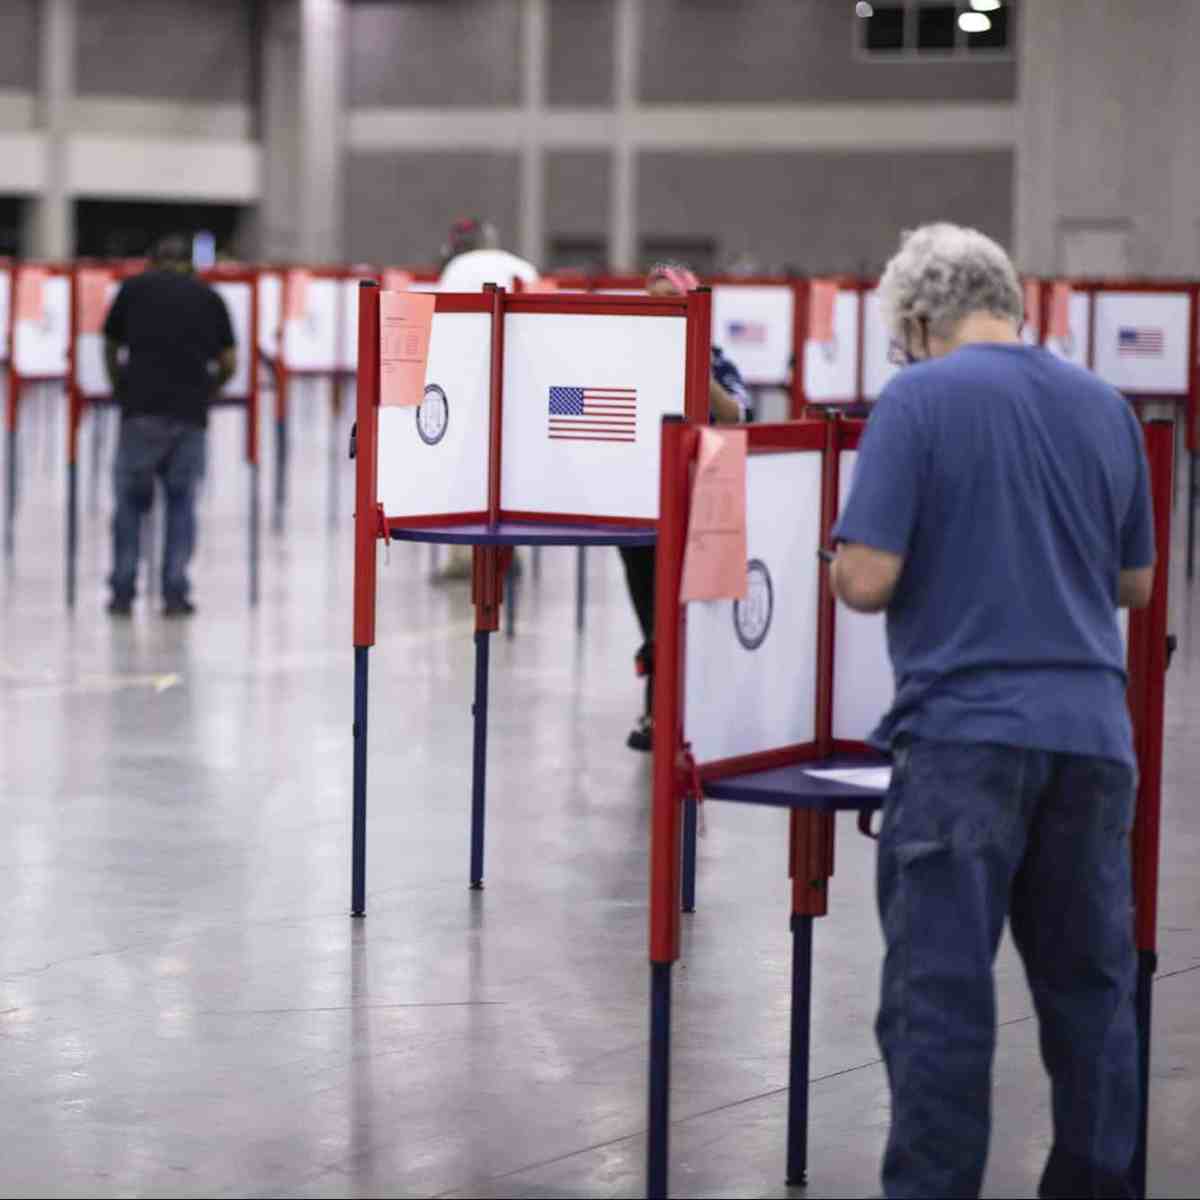 Tight deadline, savvy pitch: How one red state expanded access to the ballot